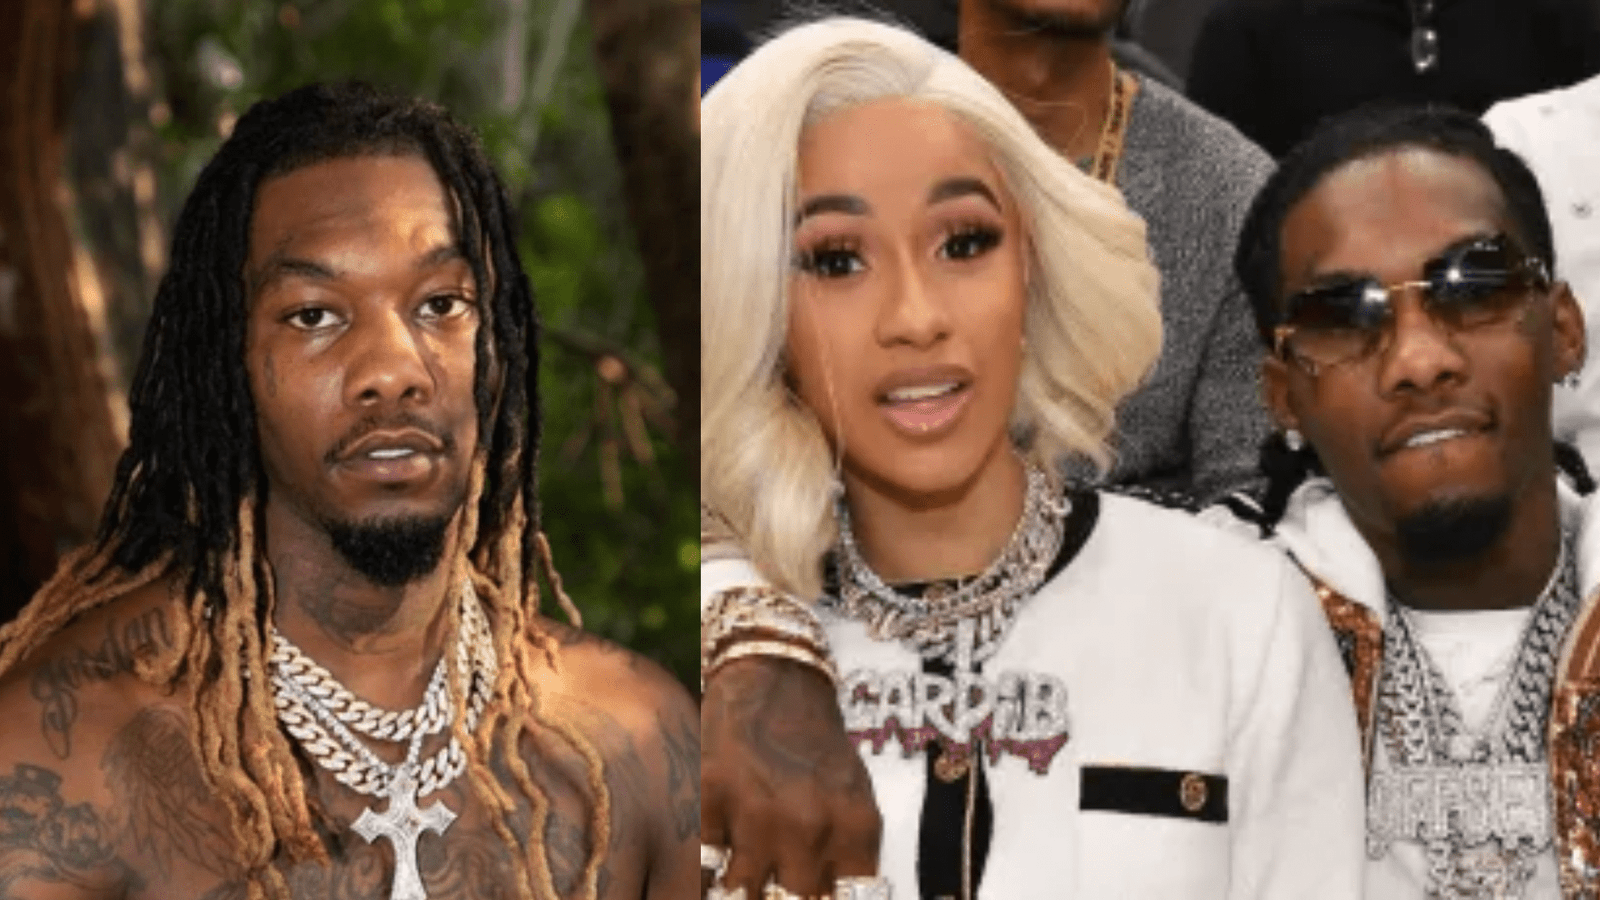 Offset Biography, Childhood, Career, Net Worth, Wife, and Children